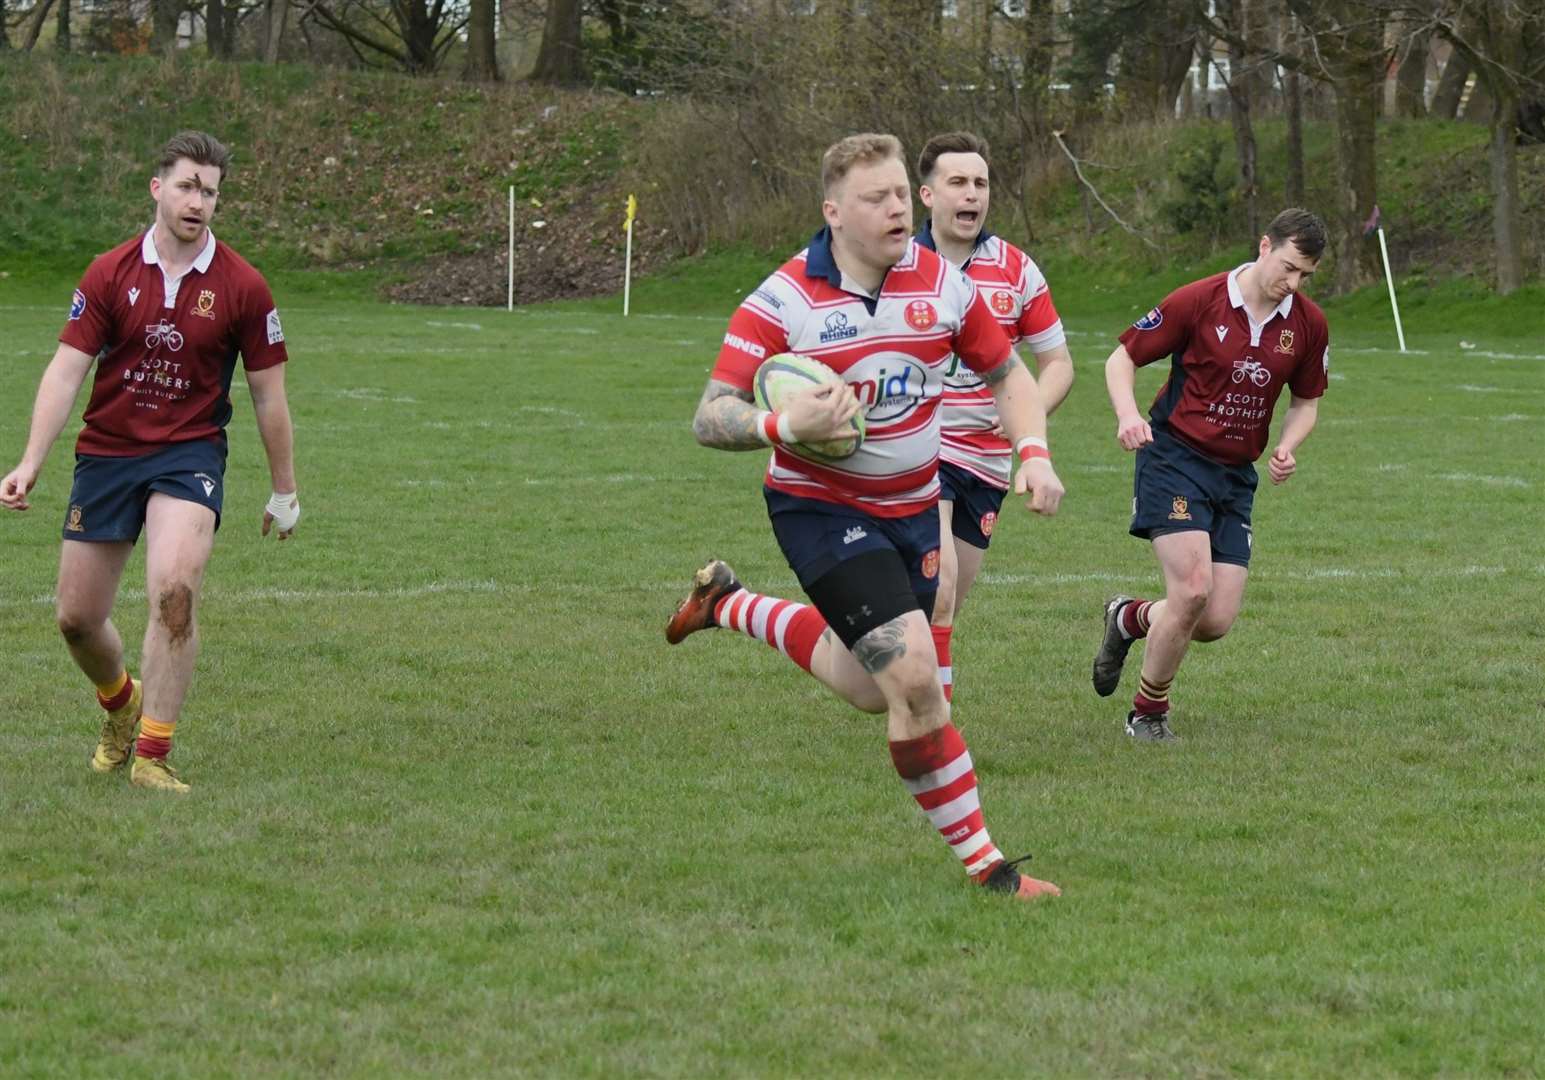 Lewis Scott is put into space to score the opening try. Picture: James Officer